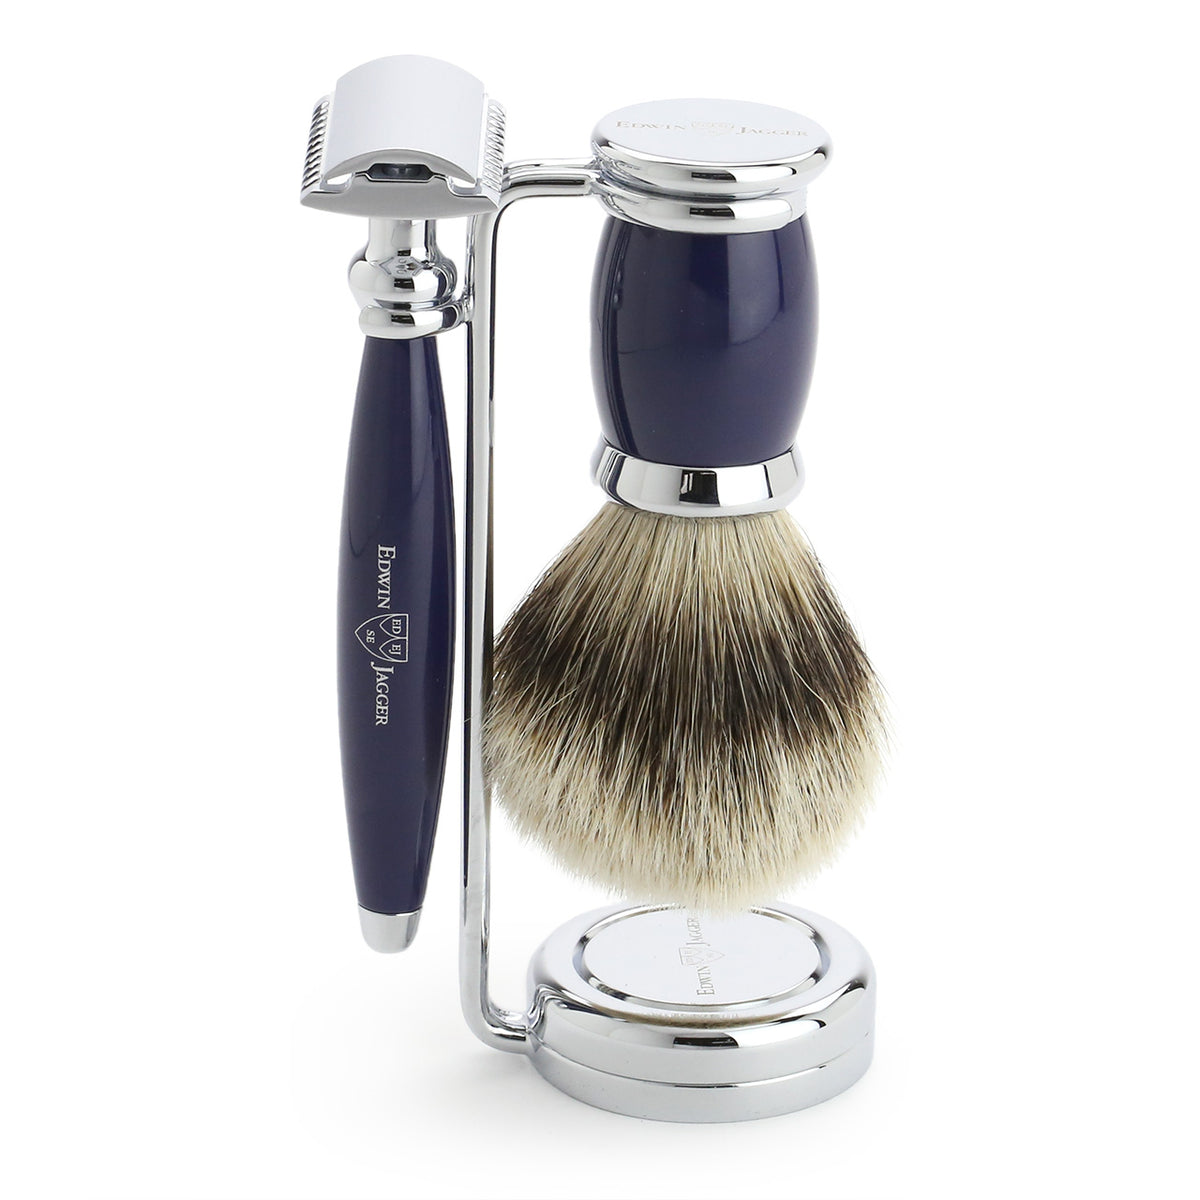 Shaving set with Super Badger Shaving Brush, Safety Razor and Stand in Navy Blue